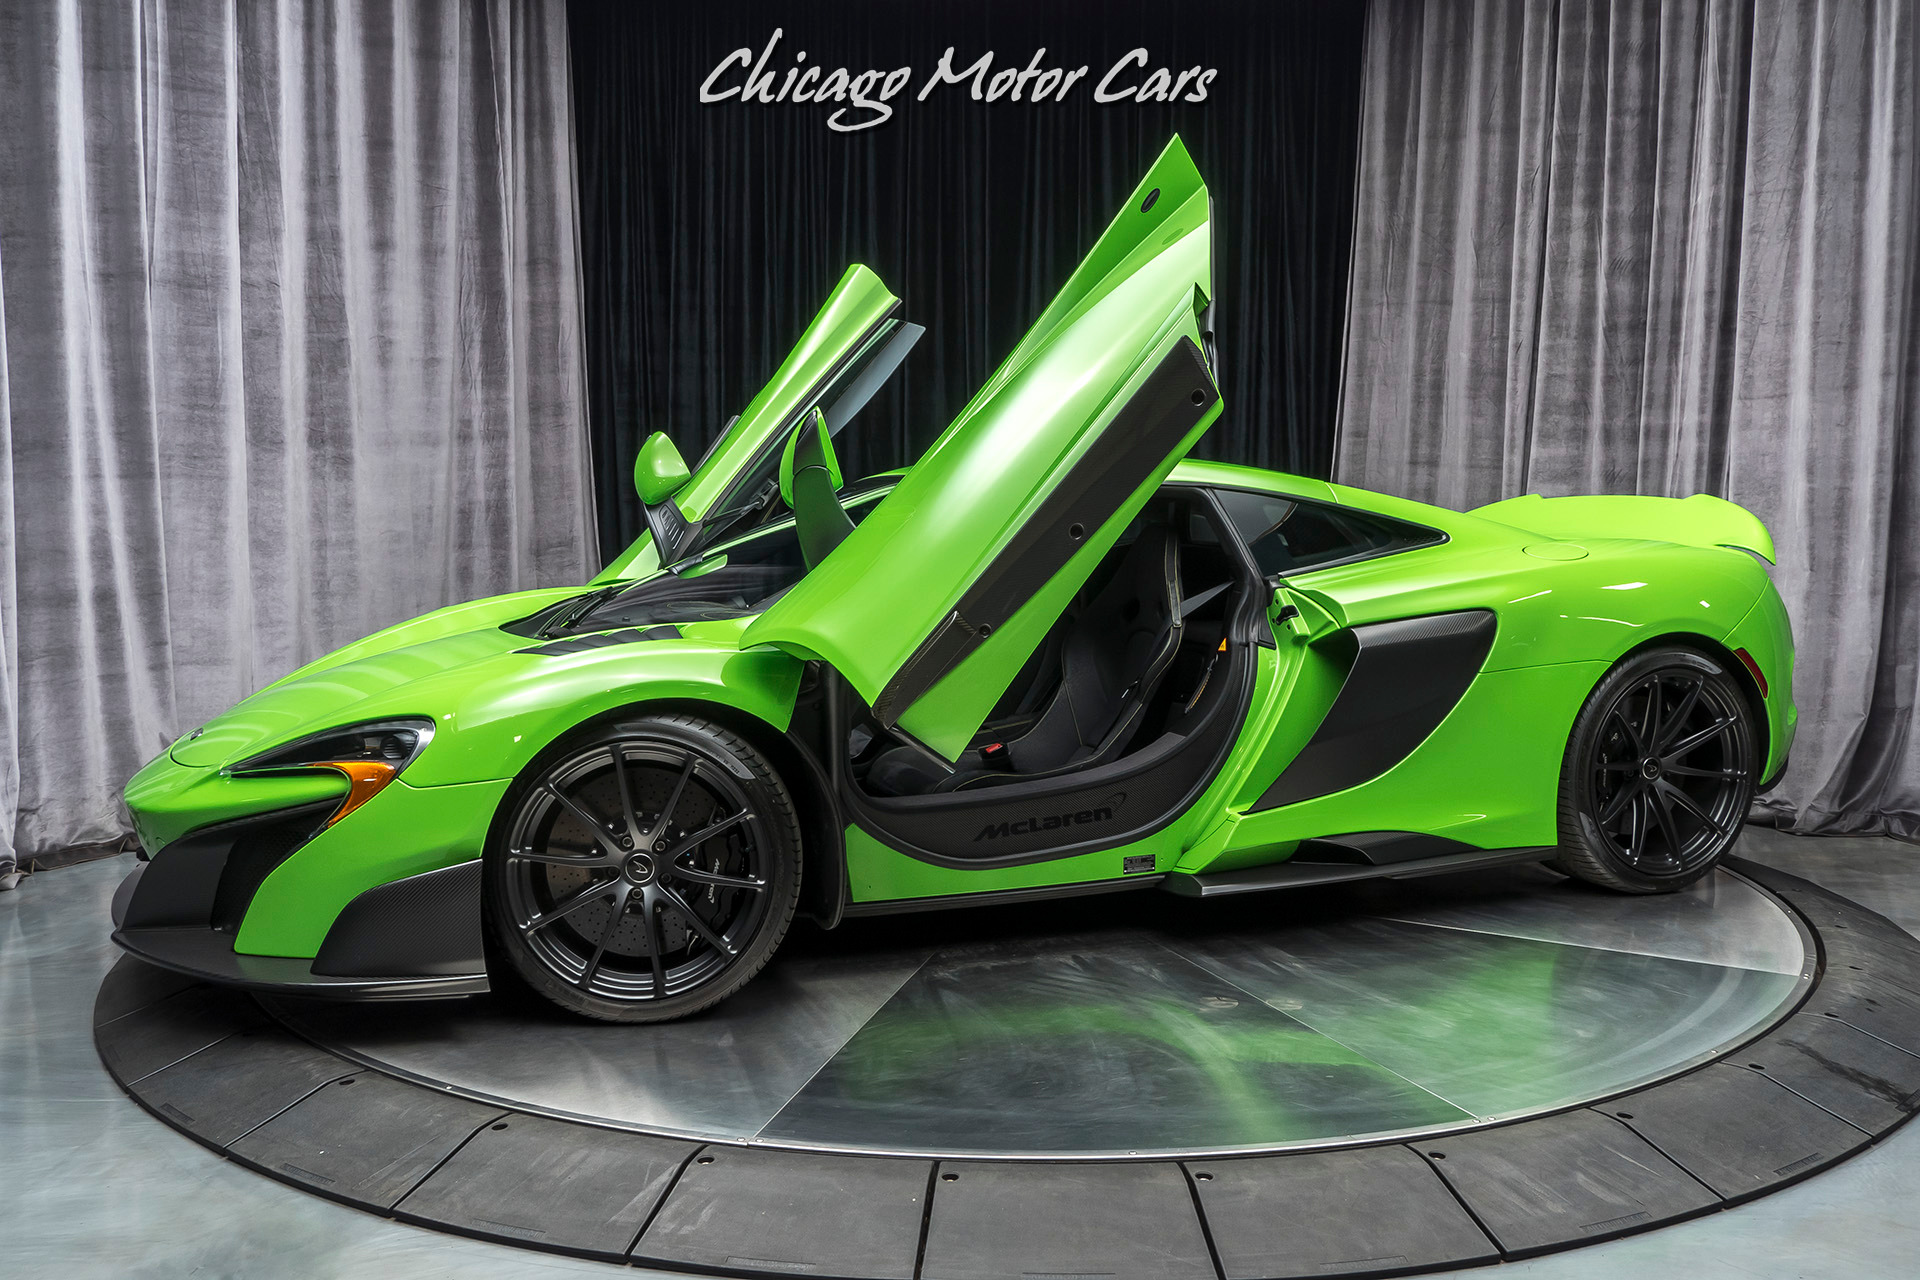 Used-2016-McLaren-675LT-Coupe-MSO-Options-MSRP-411541-EXTENDED-WARRANTY